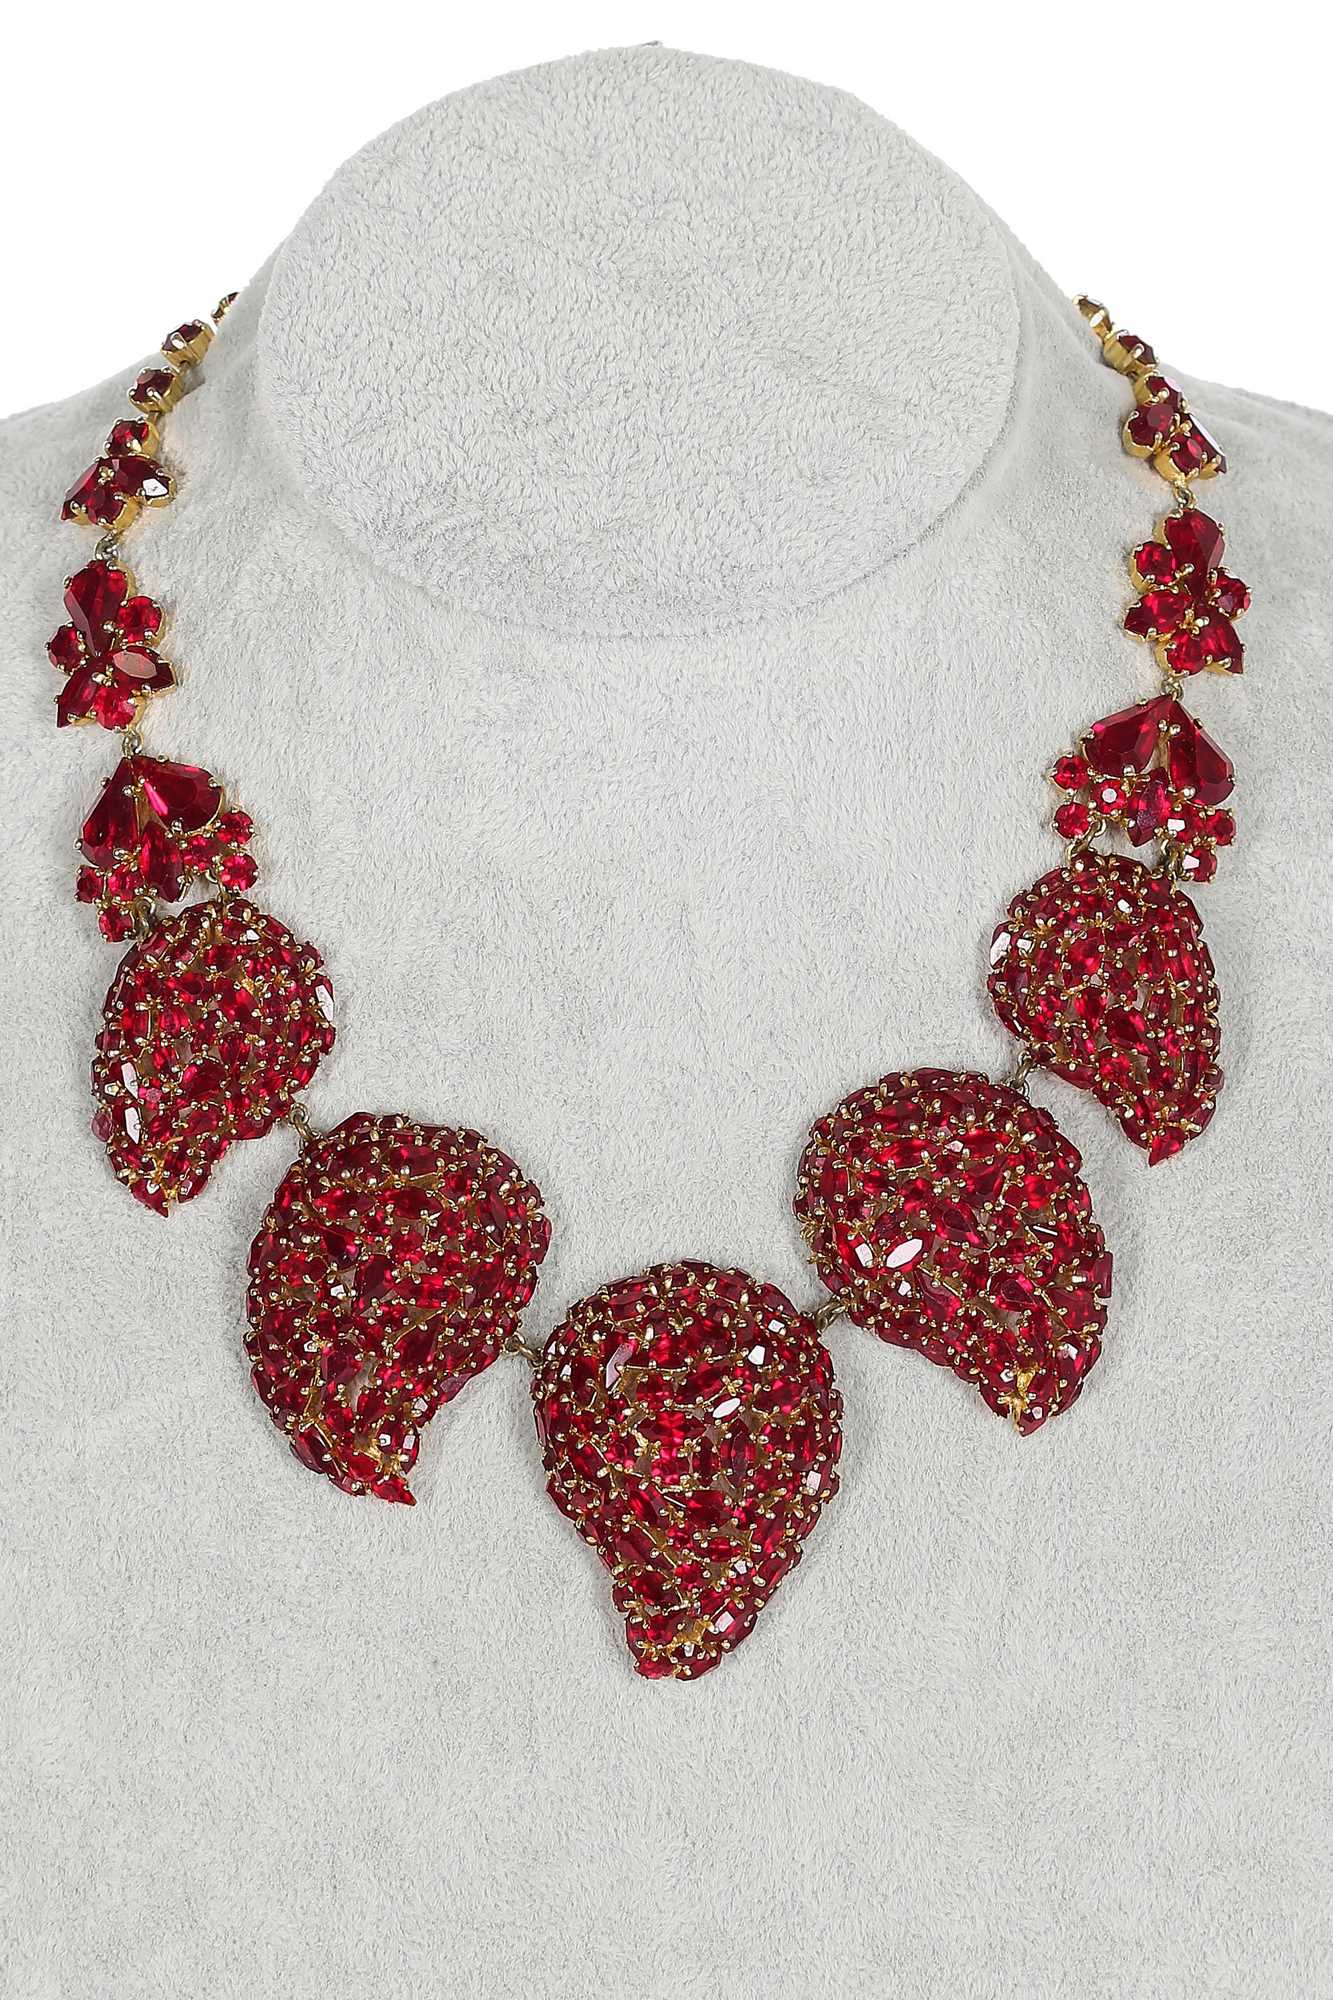 Lot 24 - A Dior necklace of faceted 'ruby' rhinestones set in a gilt metal mount, 1962